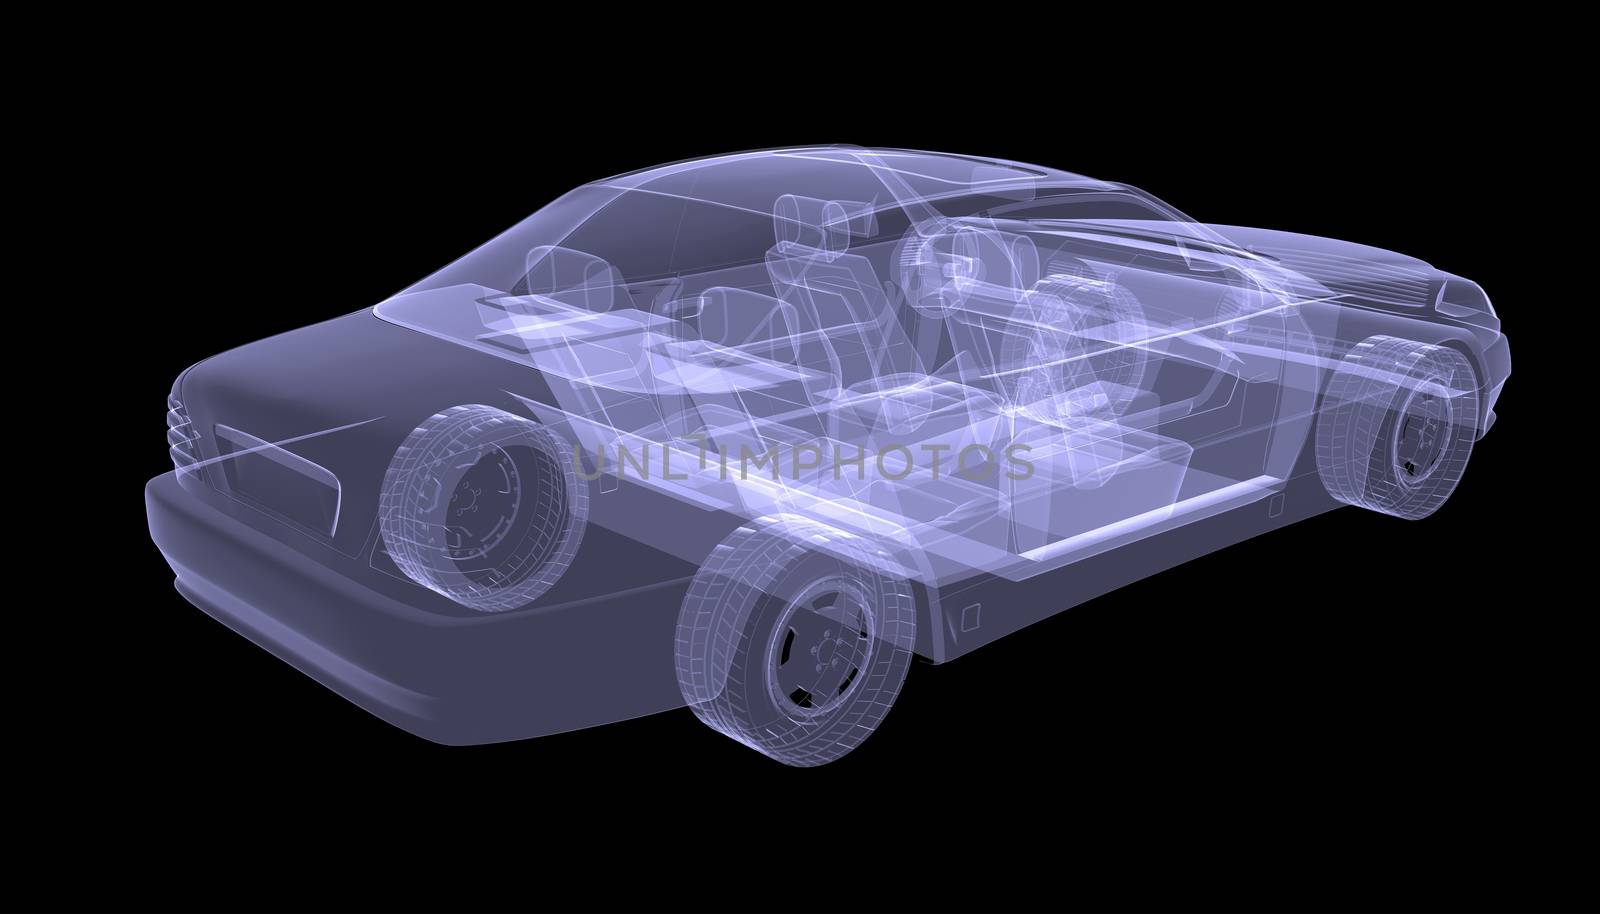 X-ray concept car. Isolated render on a black background